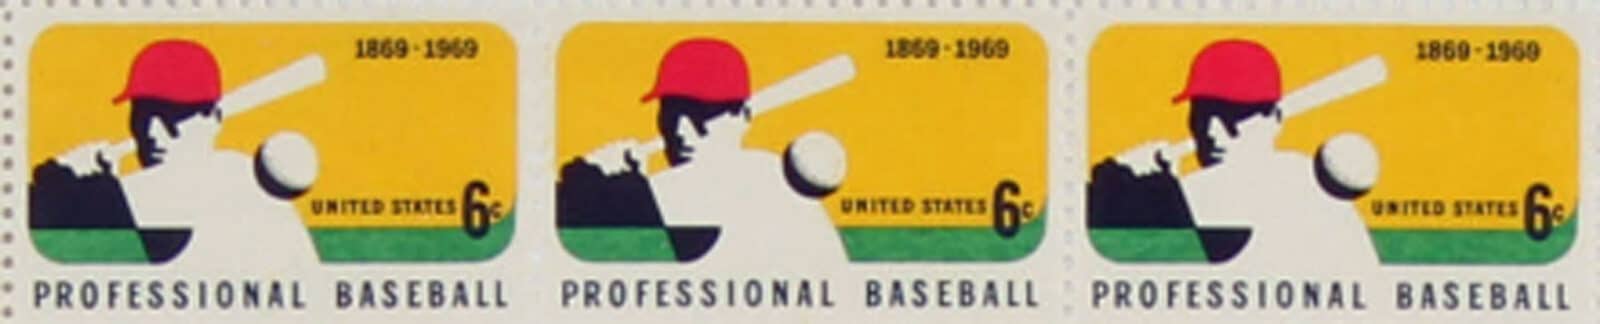 100th Anniversary of Professional Baseball U.S. Postage Stamps